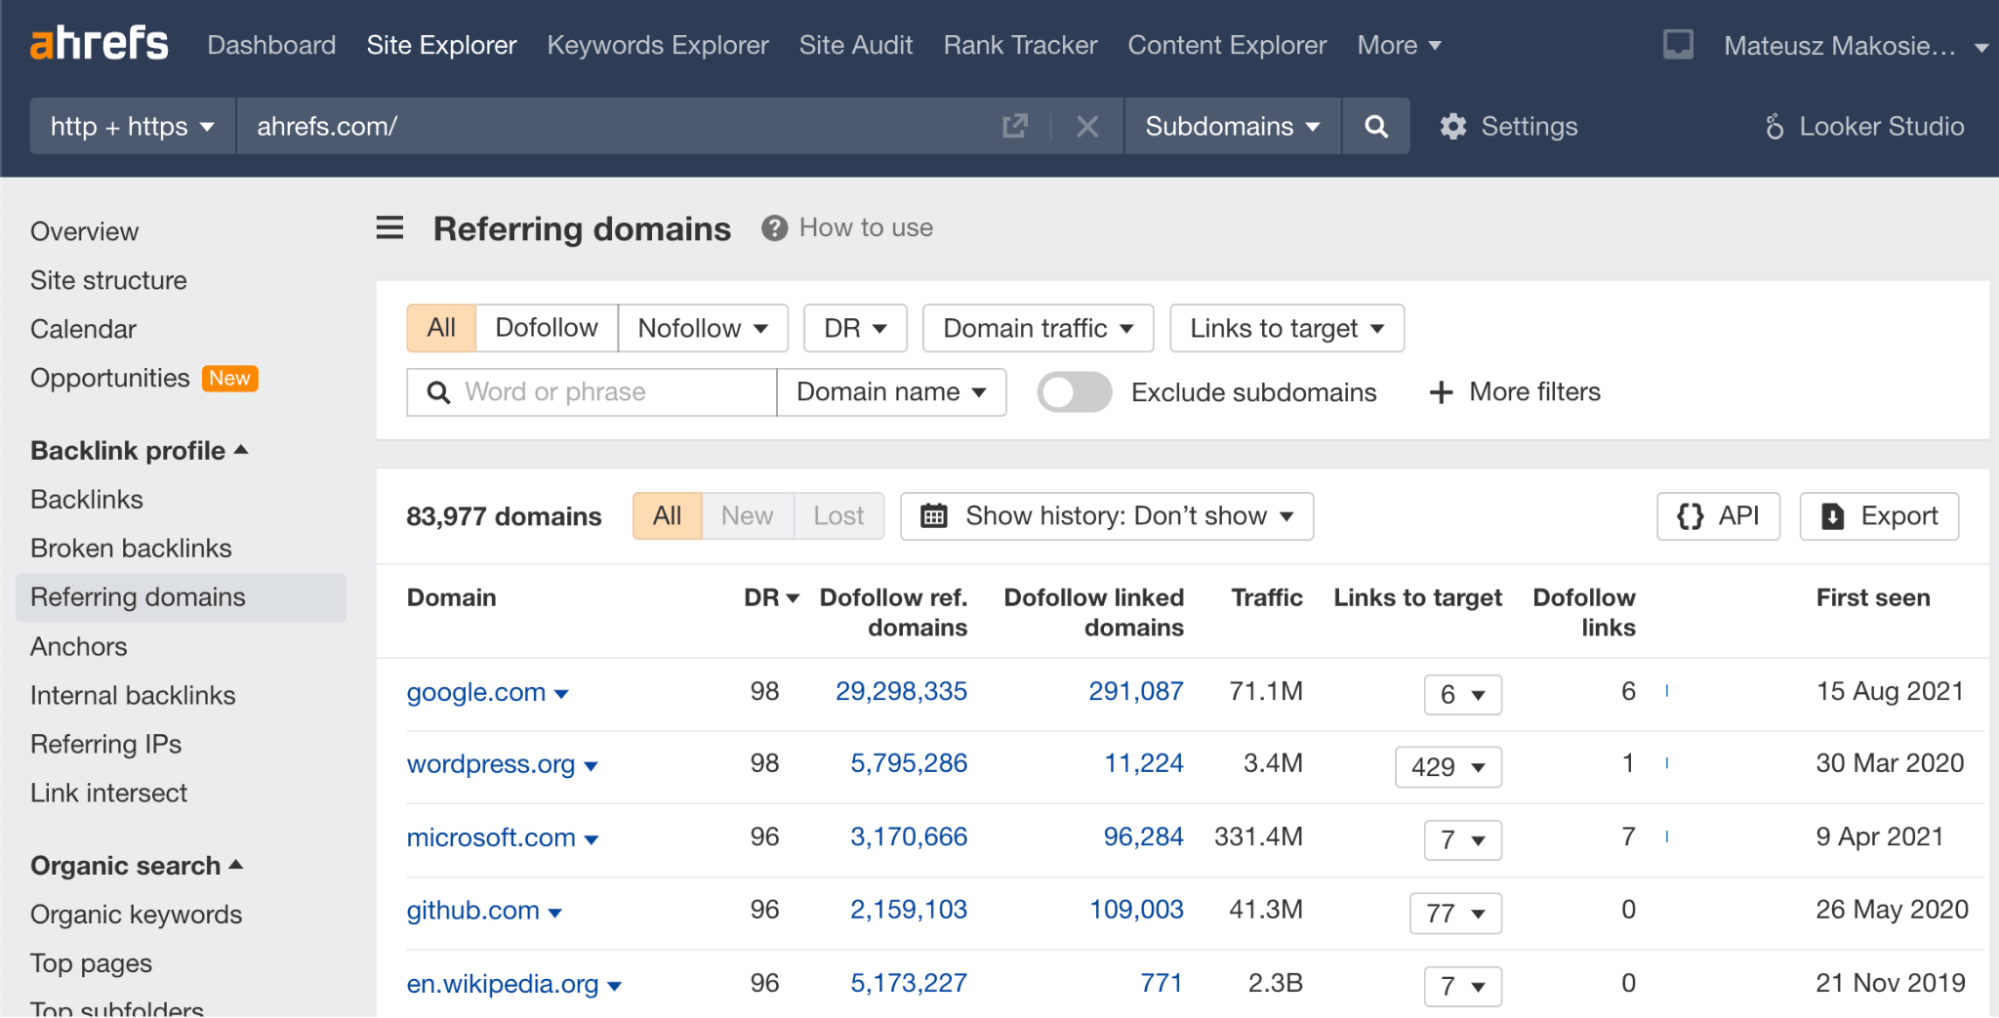 Referring domains report in Ahrefs Site Audit. 